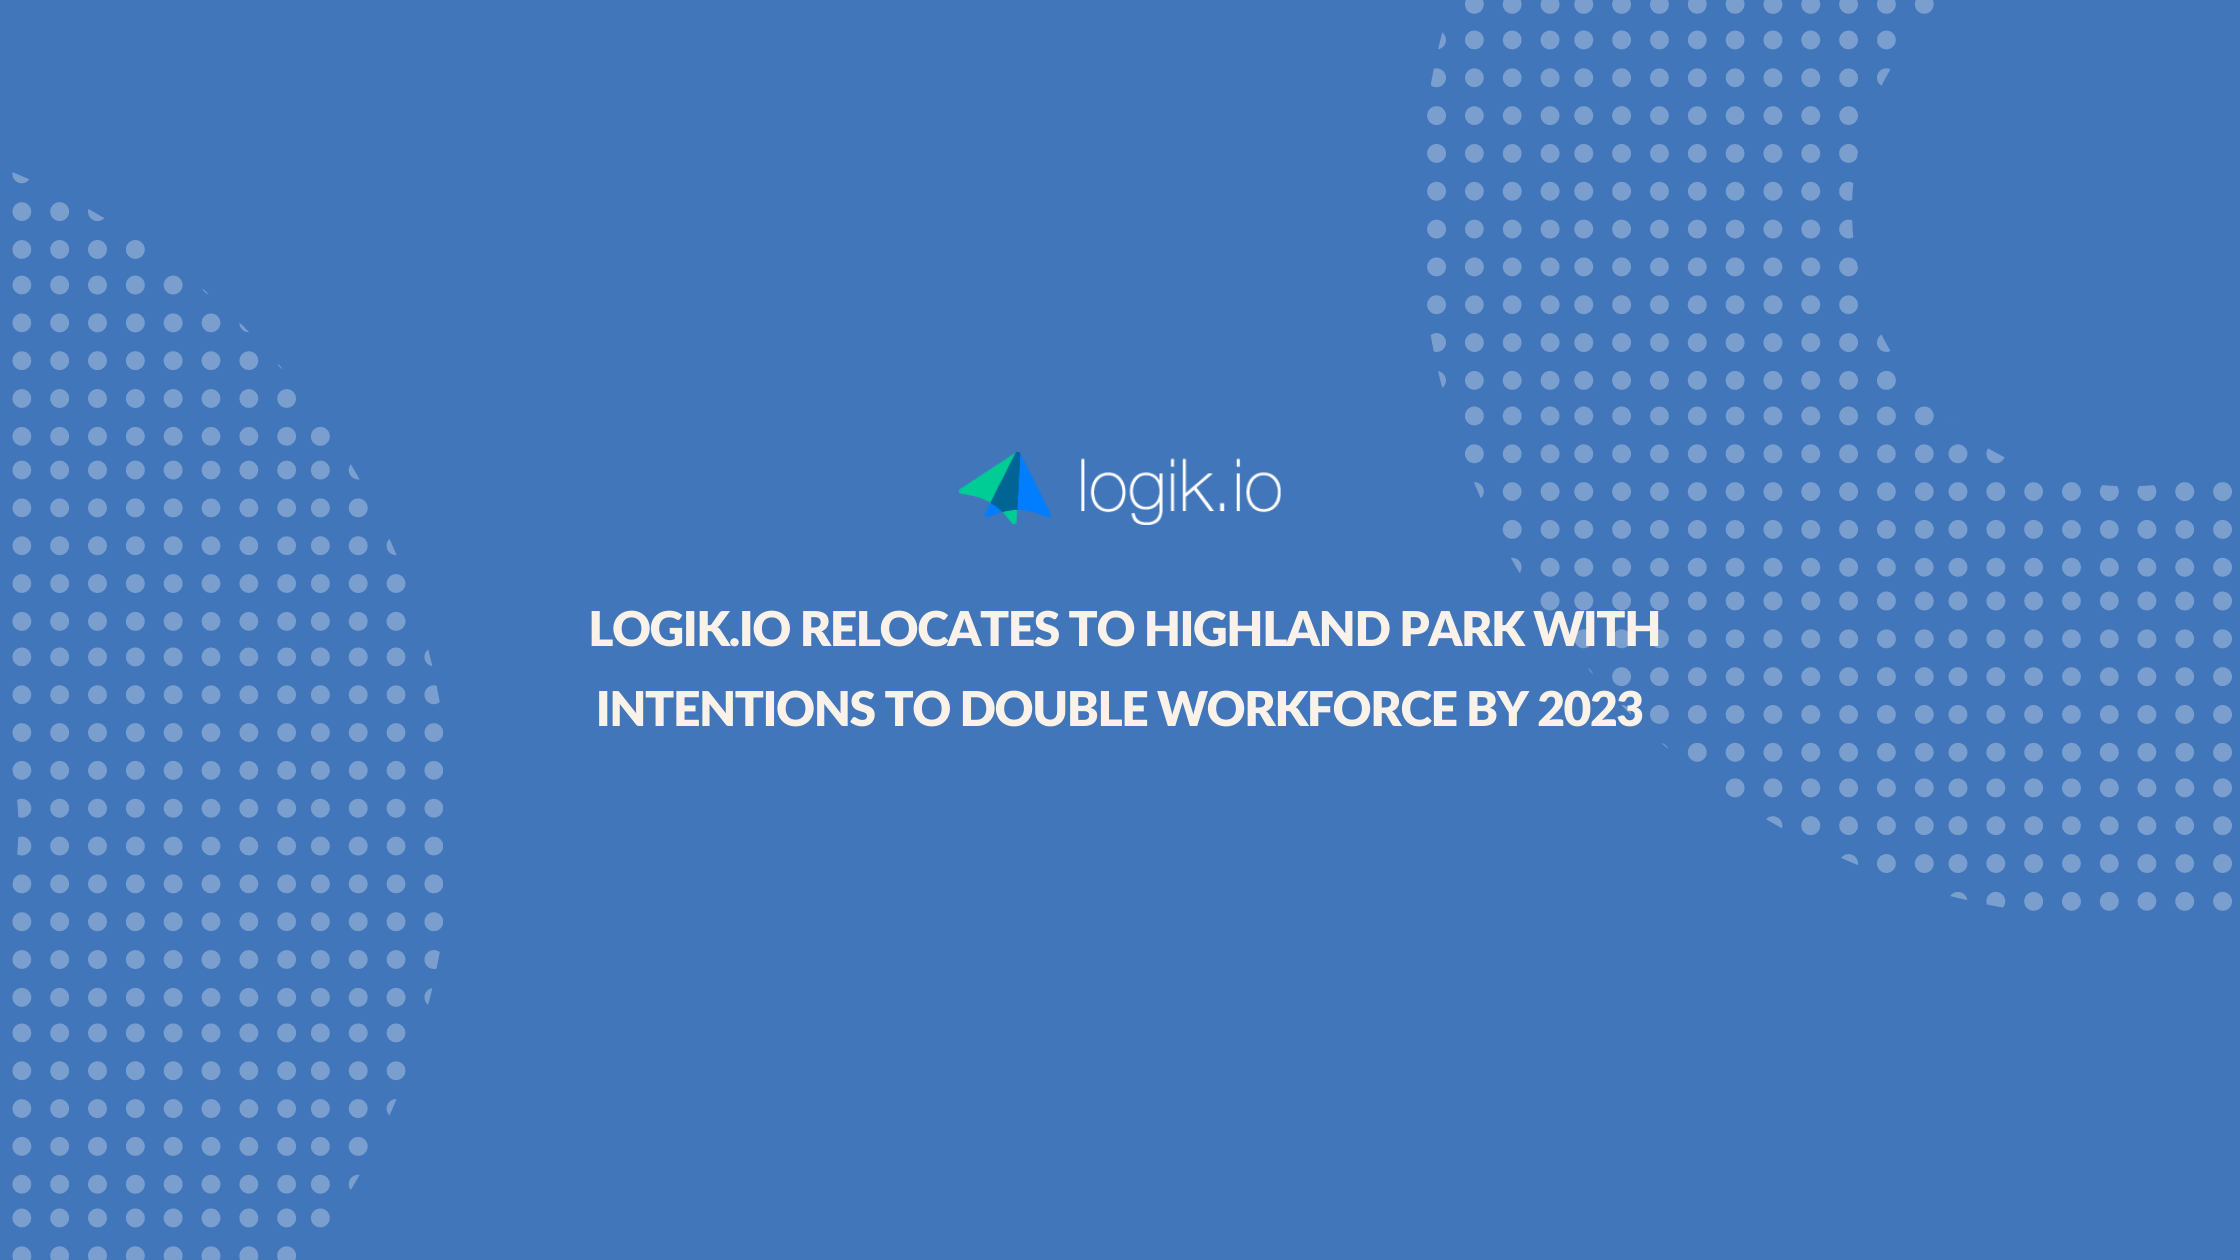 Logik.io Relocates, Plans to Double Workforce by 2023